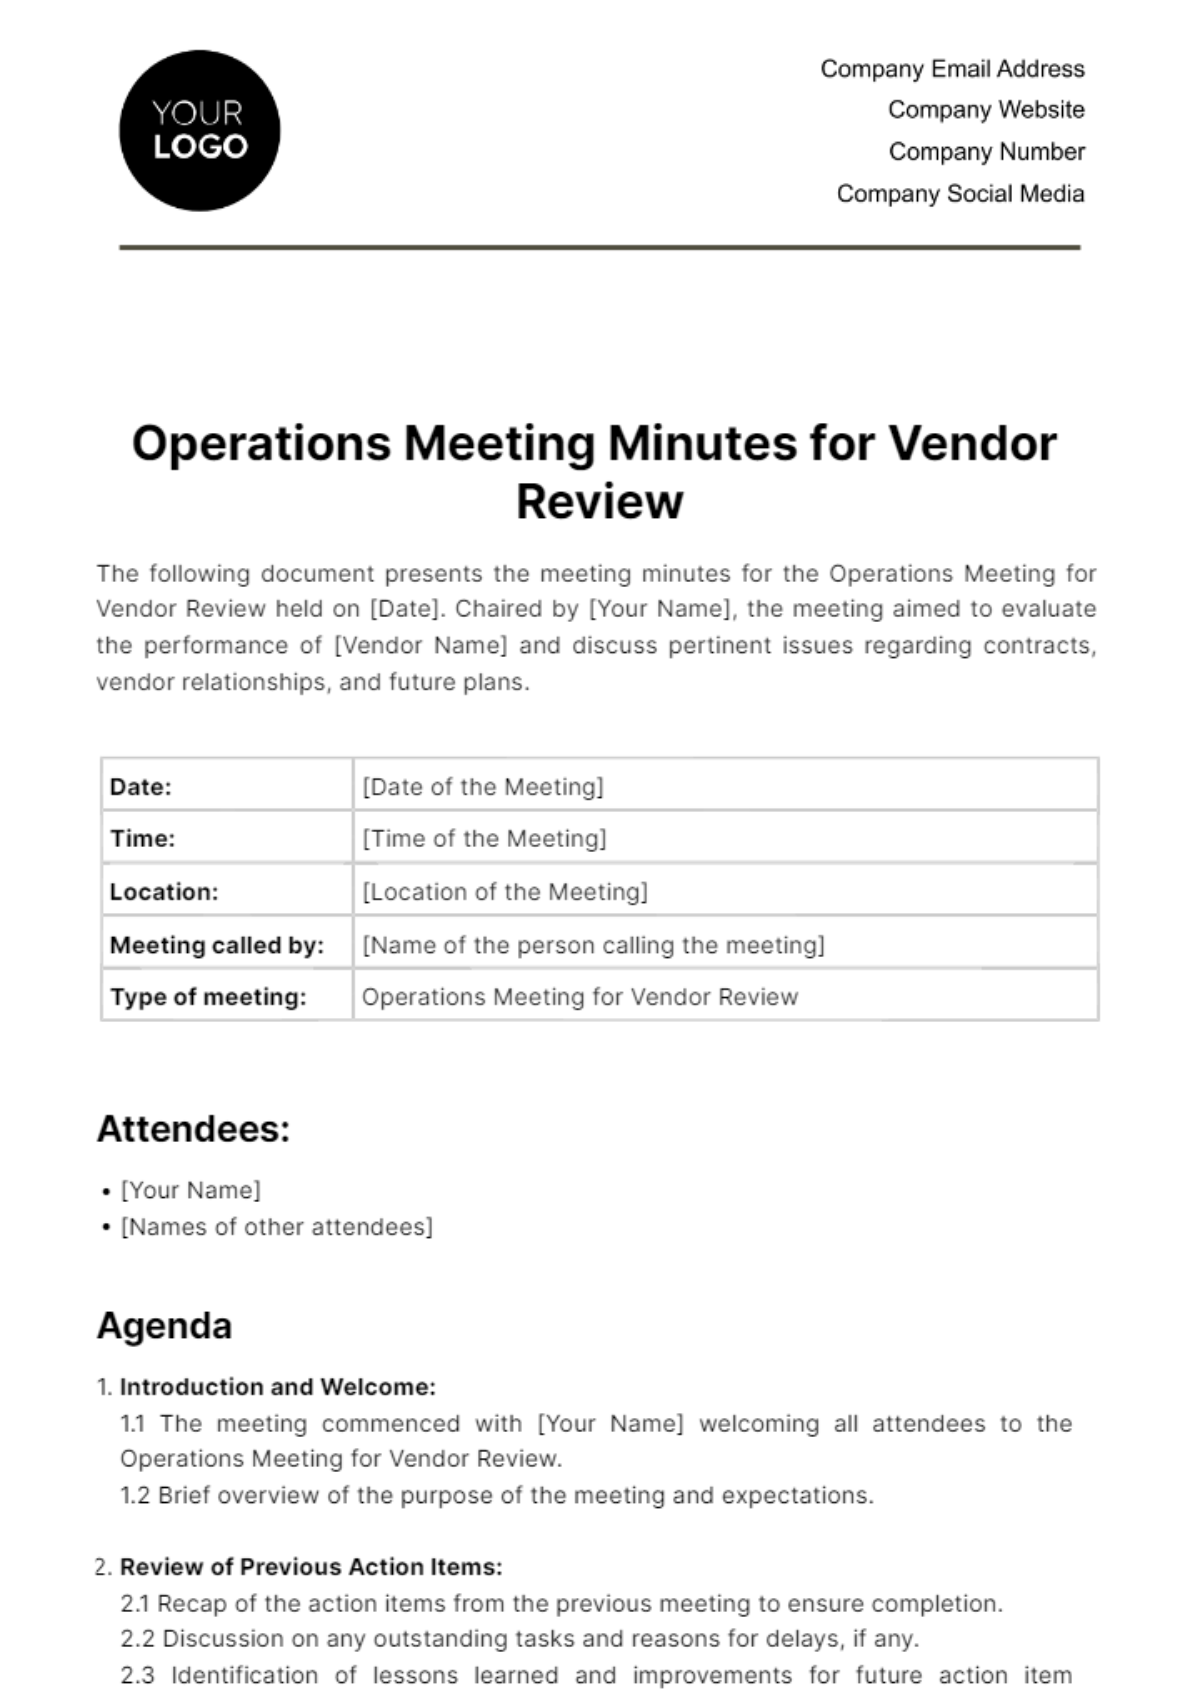 Operations Meeting Minute for Vendor Review Template